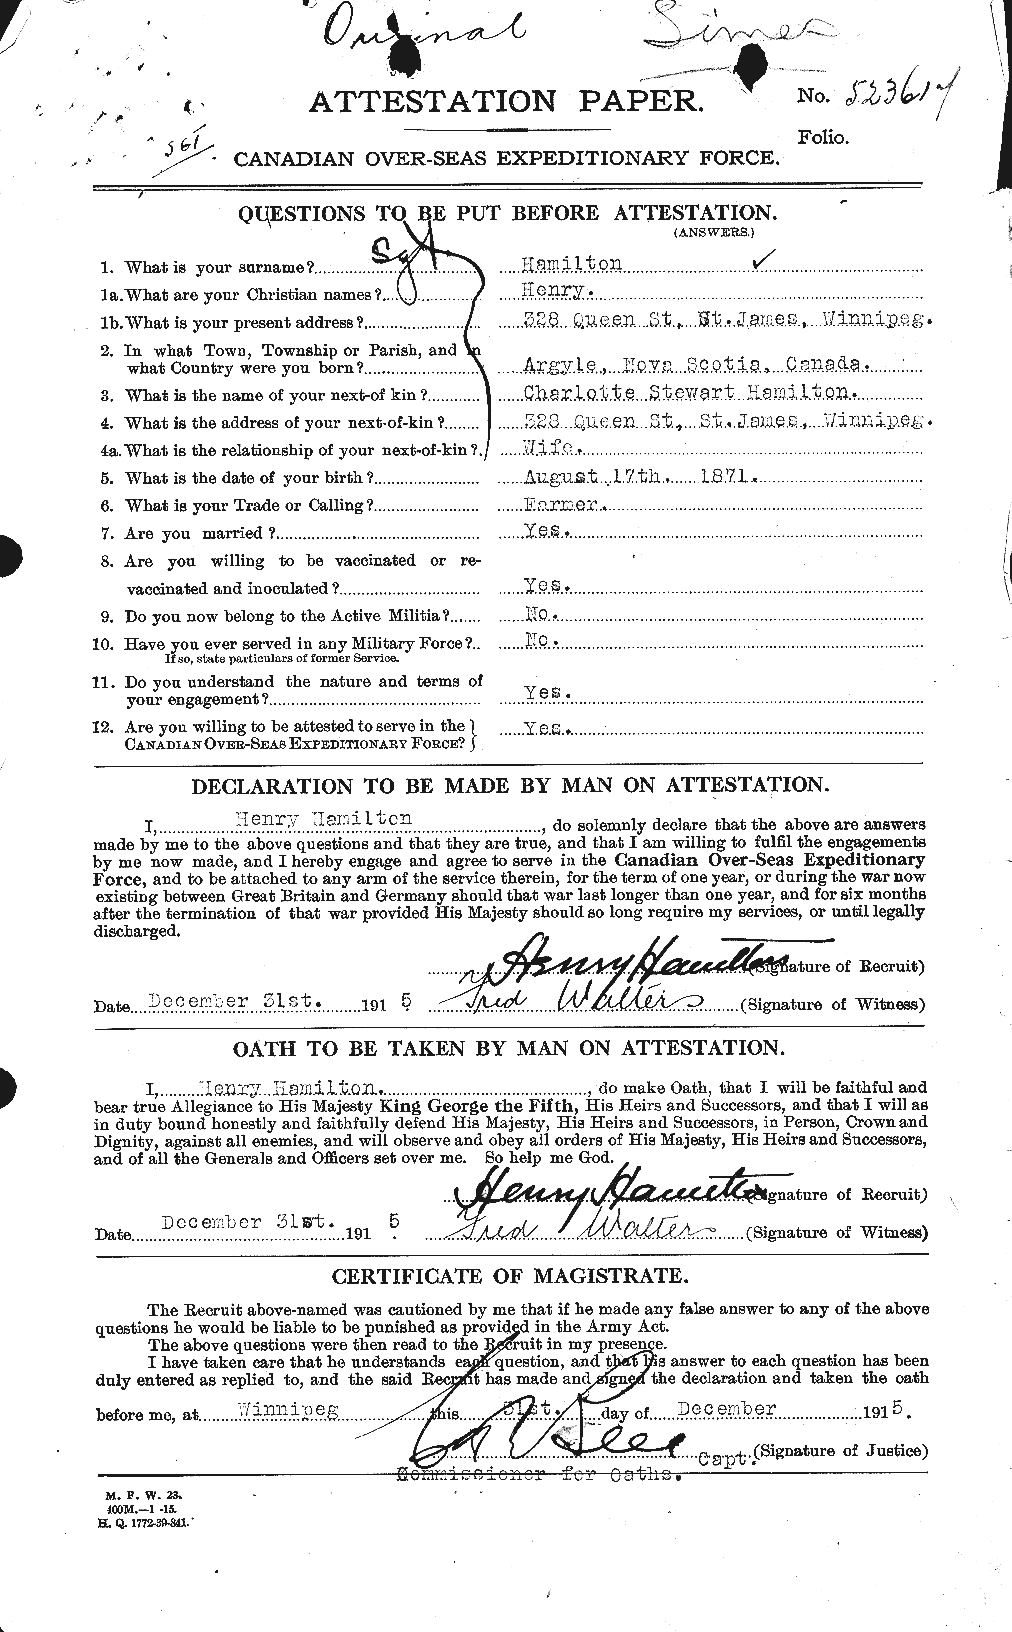 Personnel Records of the First World War - CEF 372521a